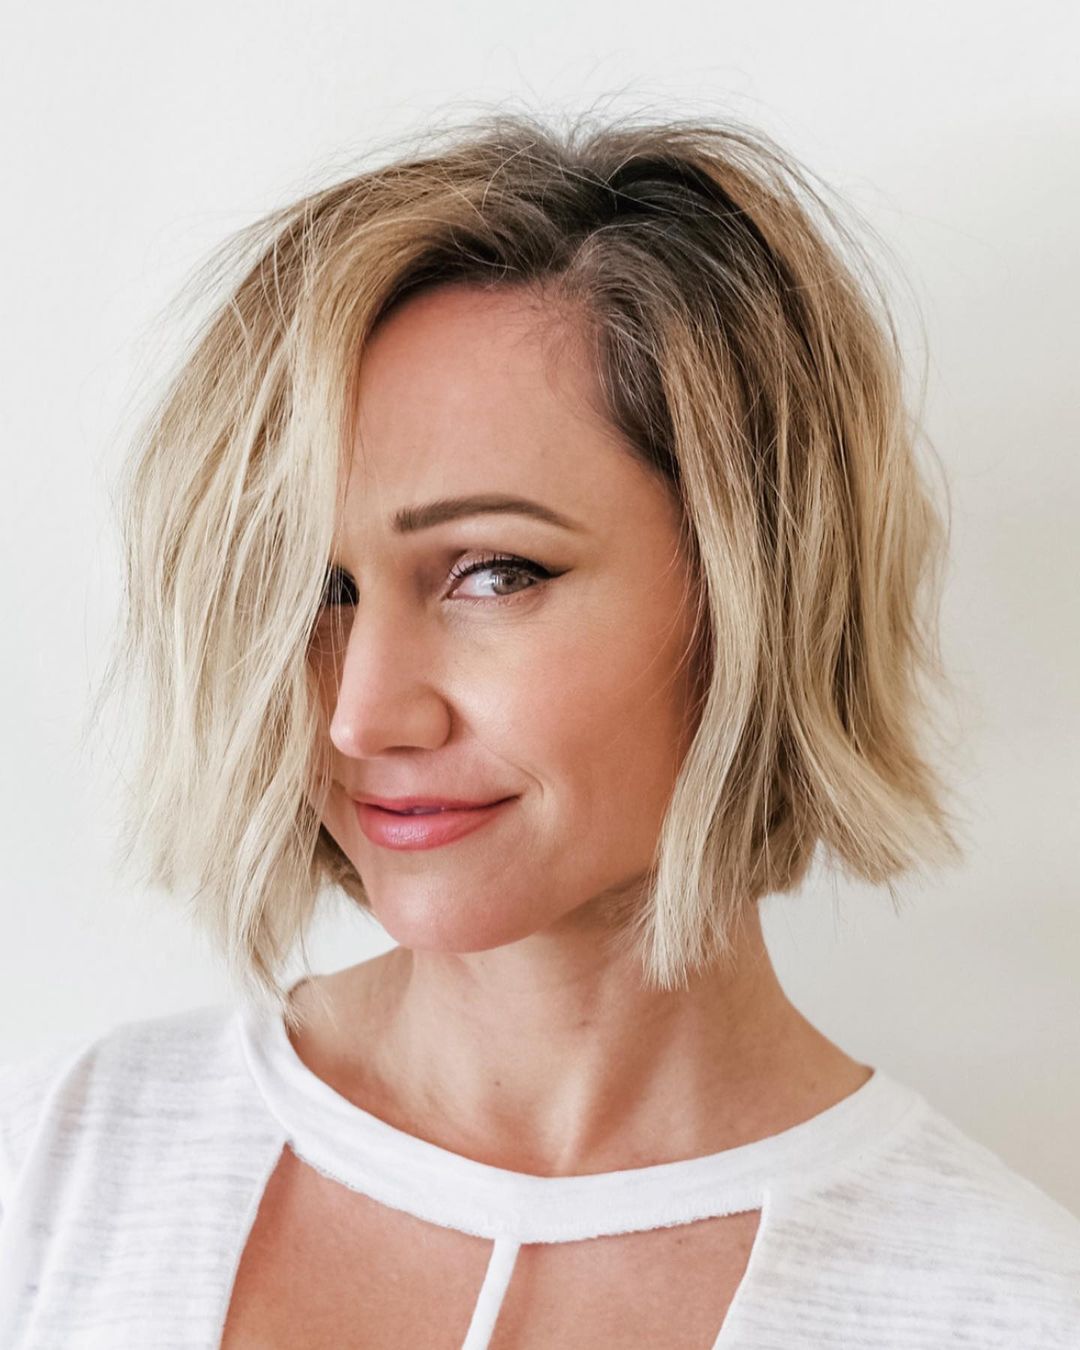 Stylish Short Haircuts for Thick Hair - Cute Short Hairstyles for Women